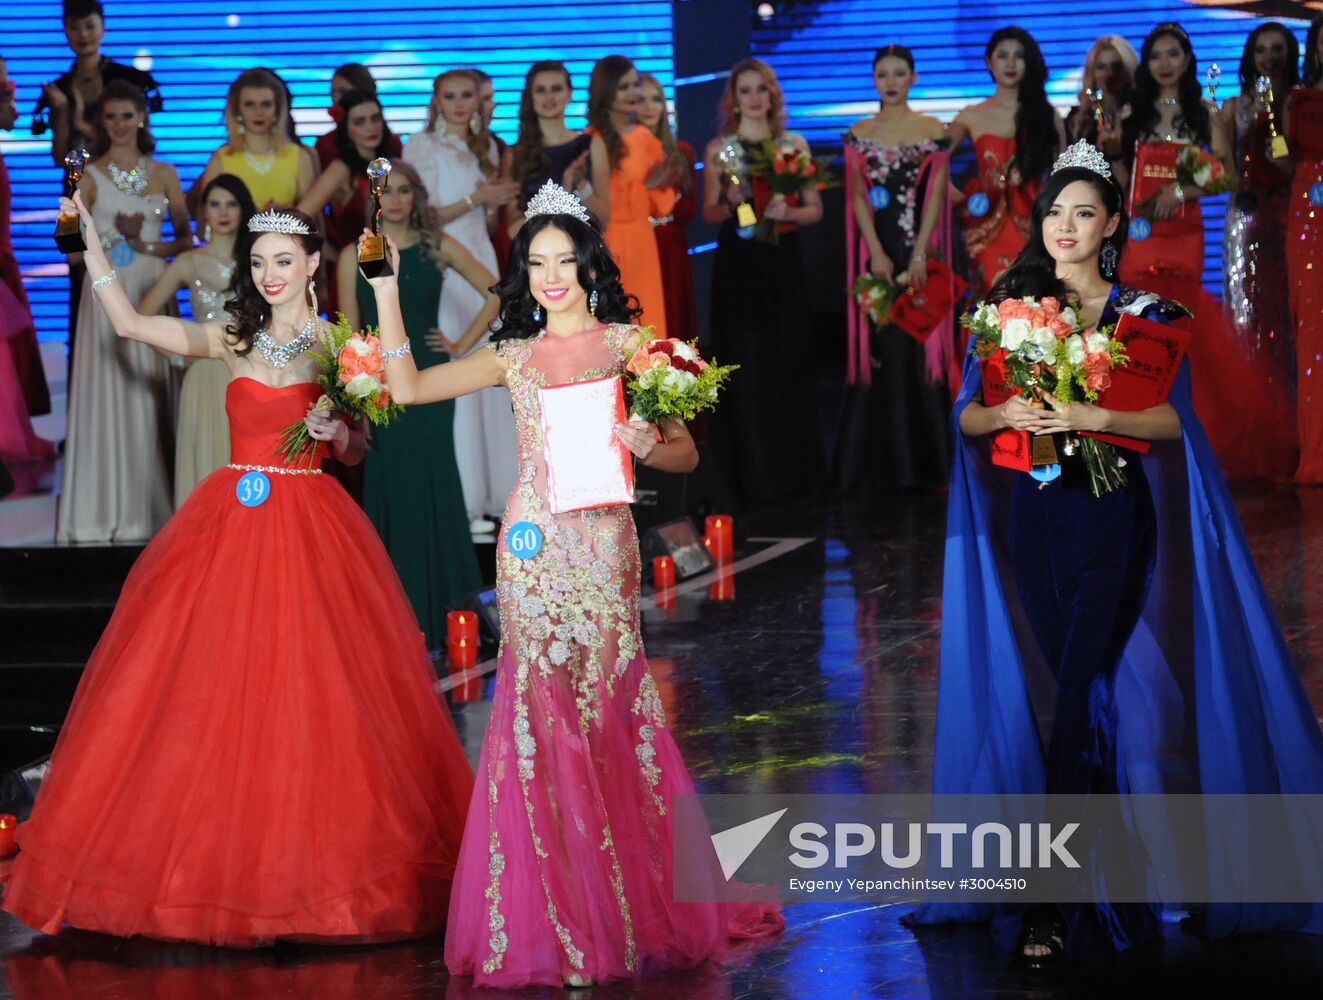 Snow Queen International Beauty Contest in China